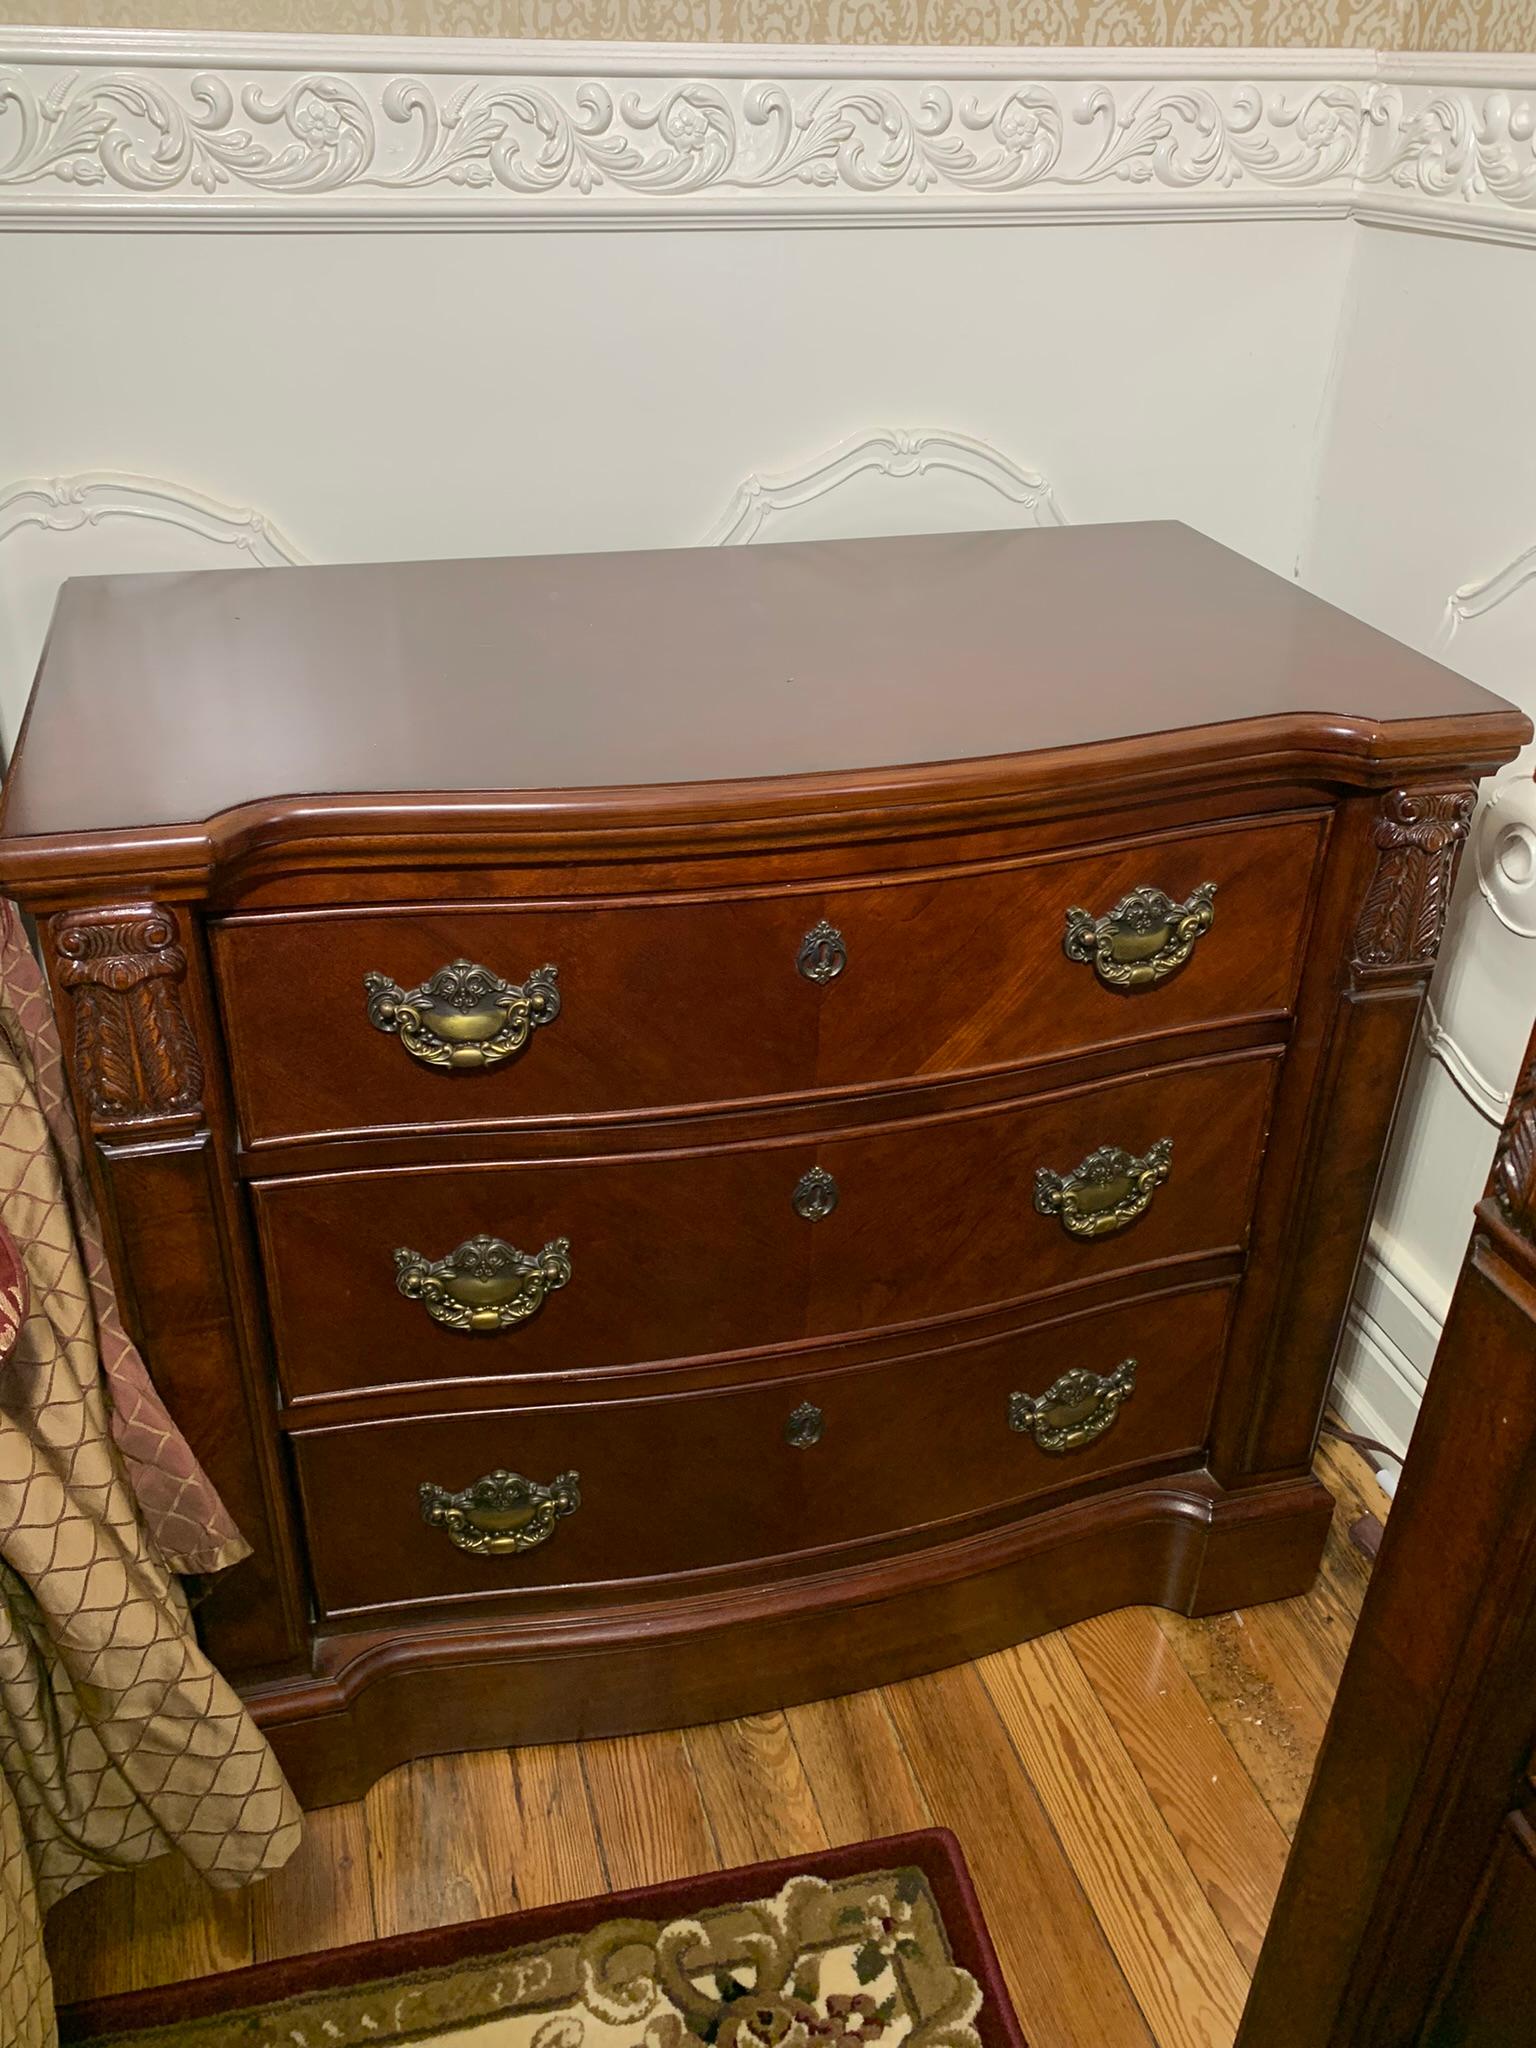 Broyhill Night Stands